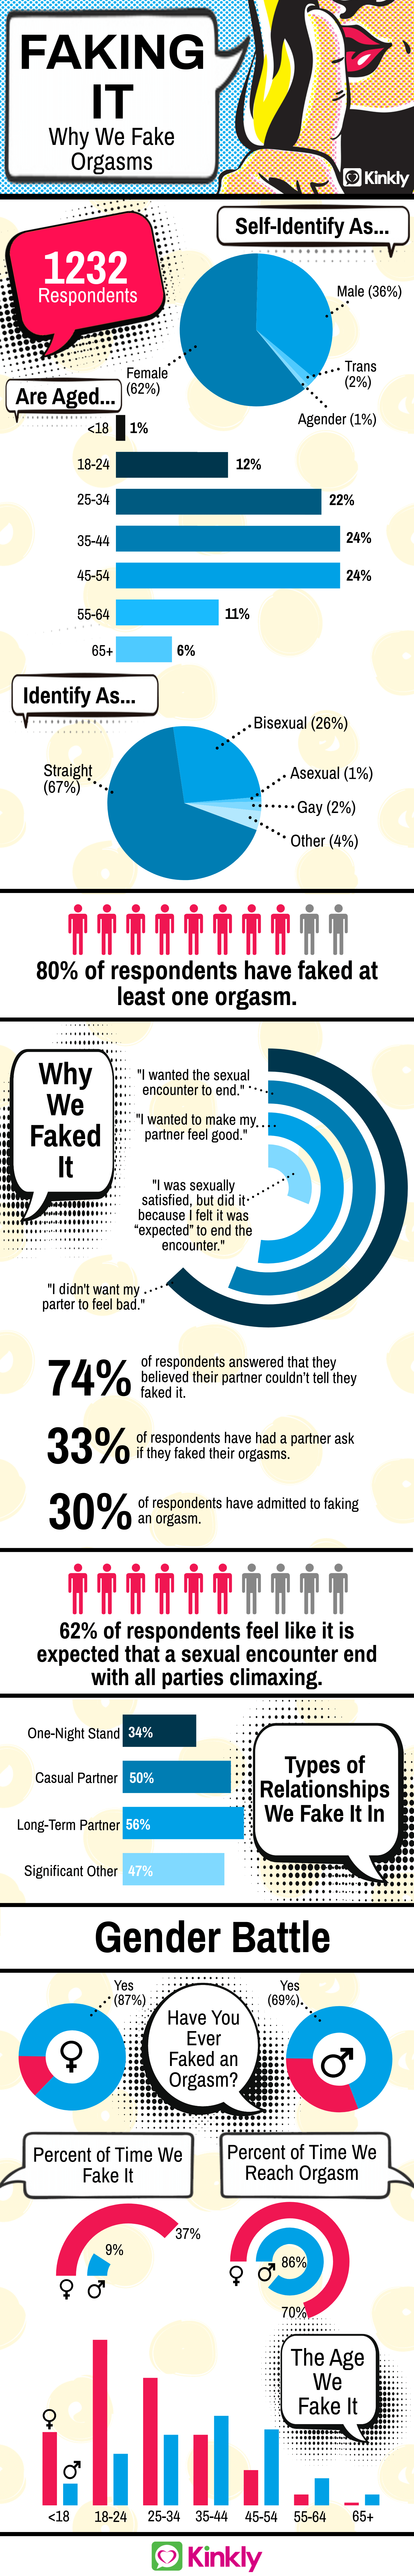 full infographic: Faking It: Why We Fake Orgasms